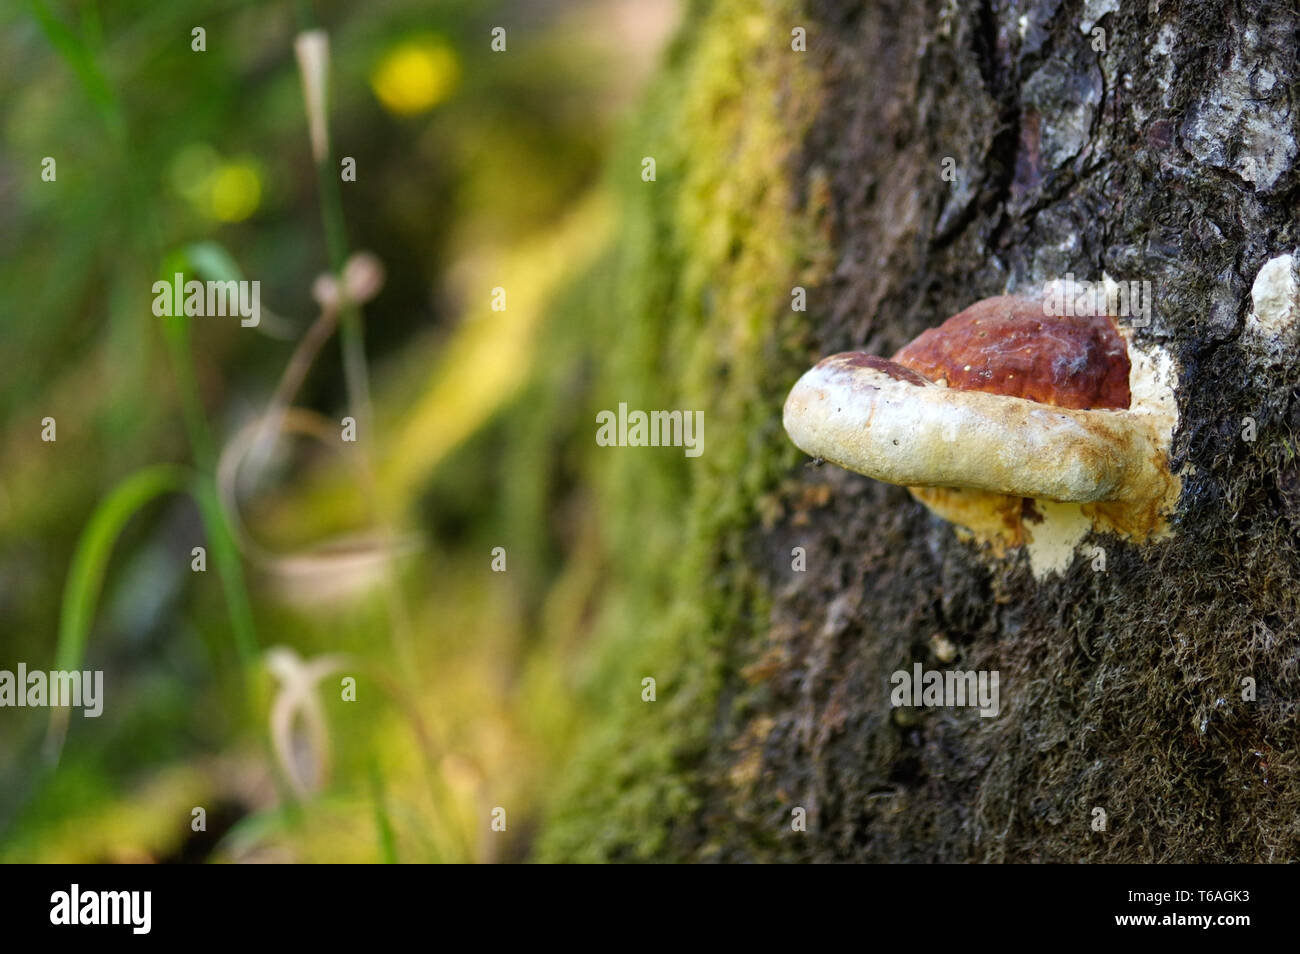 Large fungus growing on the side of a old tree. Stock Photo